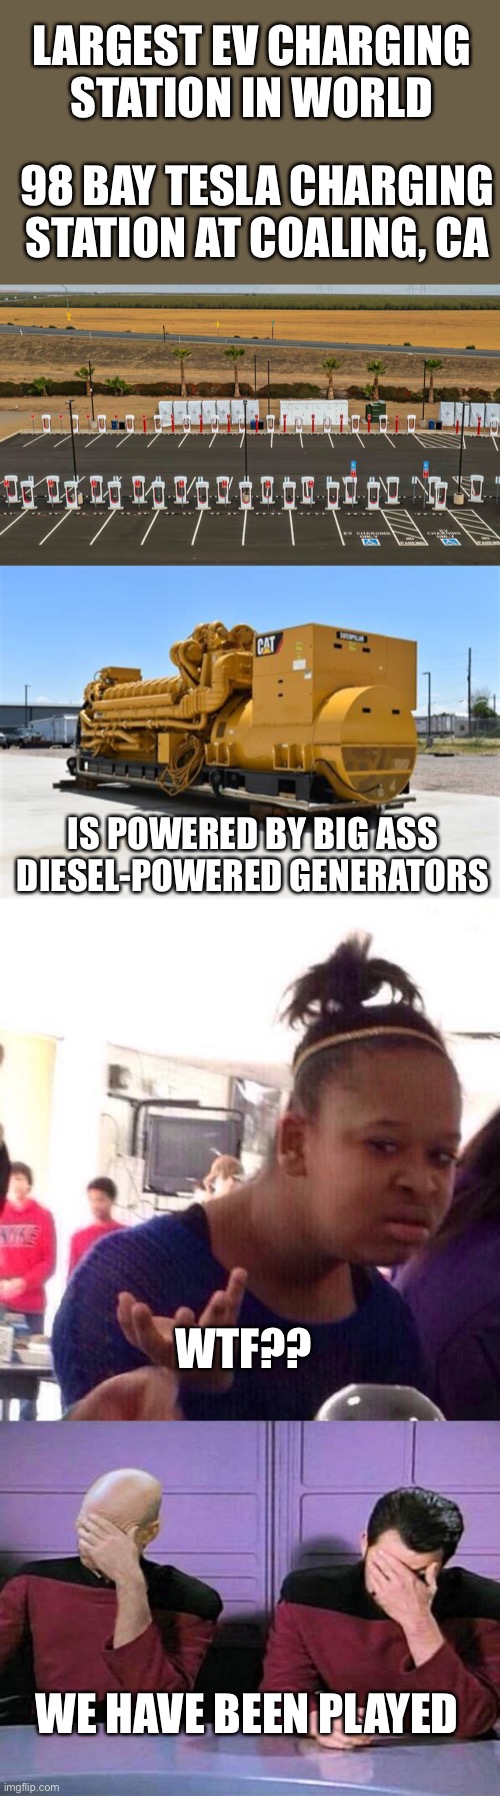 This should help you get it. | LARGEST EV CHARGING STATION IN WORLD; 98 BAY TESLA CHARGING STATION AT COALING, CA; IS POWERED BY BIG ASS DIESEL-POWERED GENERATORS; WTF?? WE HAVE BEEN PLAYED | image tagged in black girl wat,ev charging,diesel generator,played | made w/ Imgflip meme maker